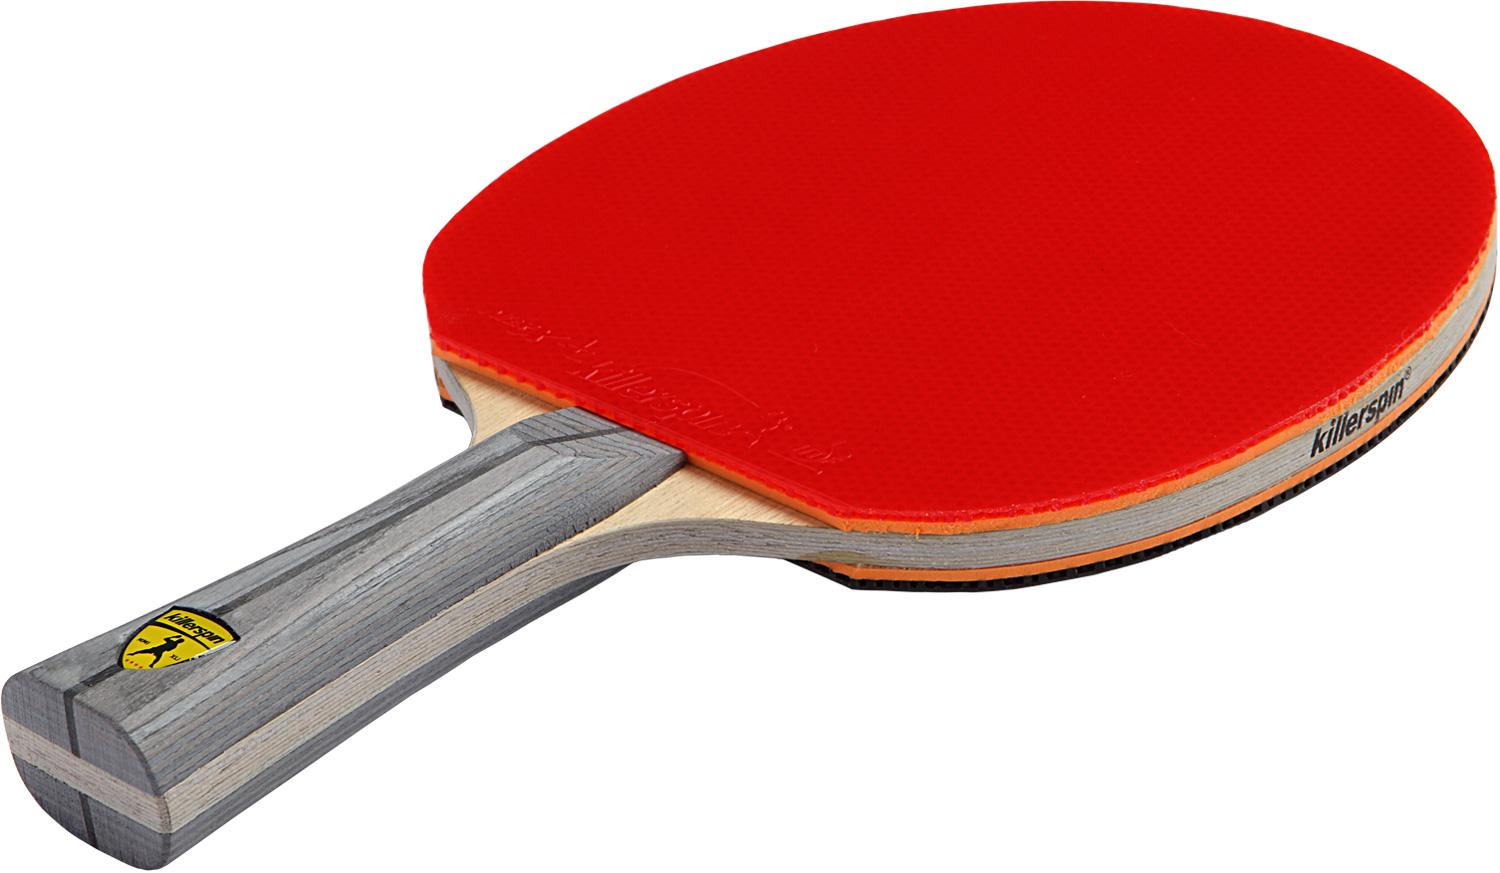 Killerspin JET600 SPIN N1 Intermediate Table Tennis Paddle, Red - image 2 of 4